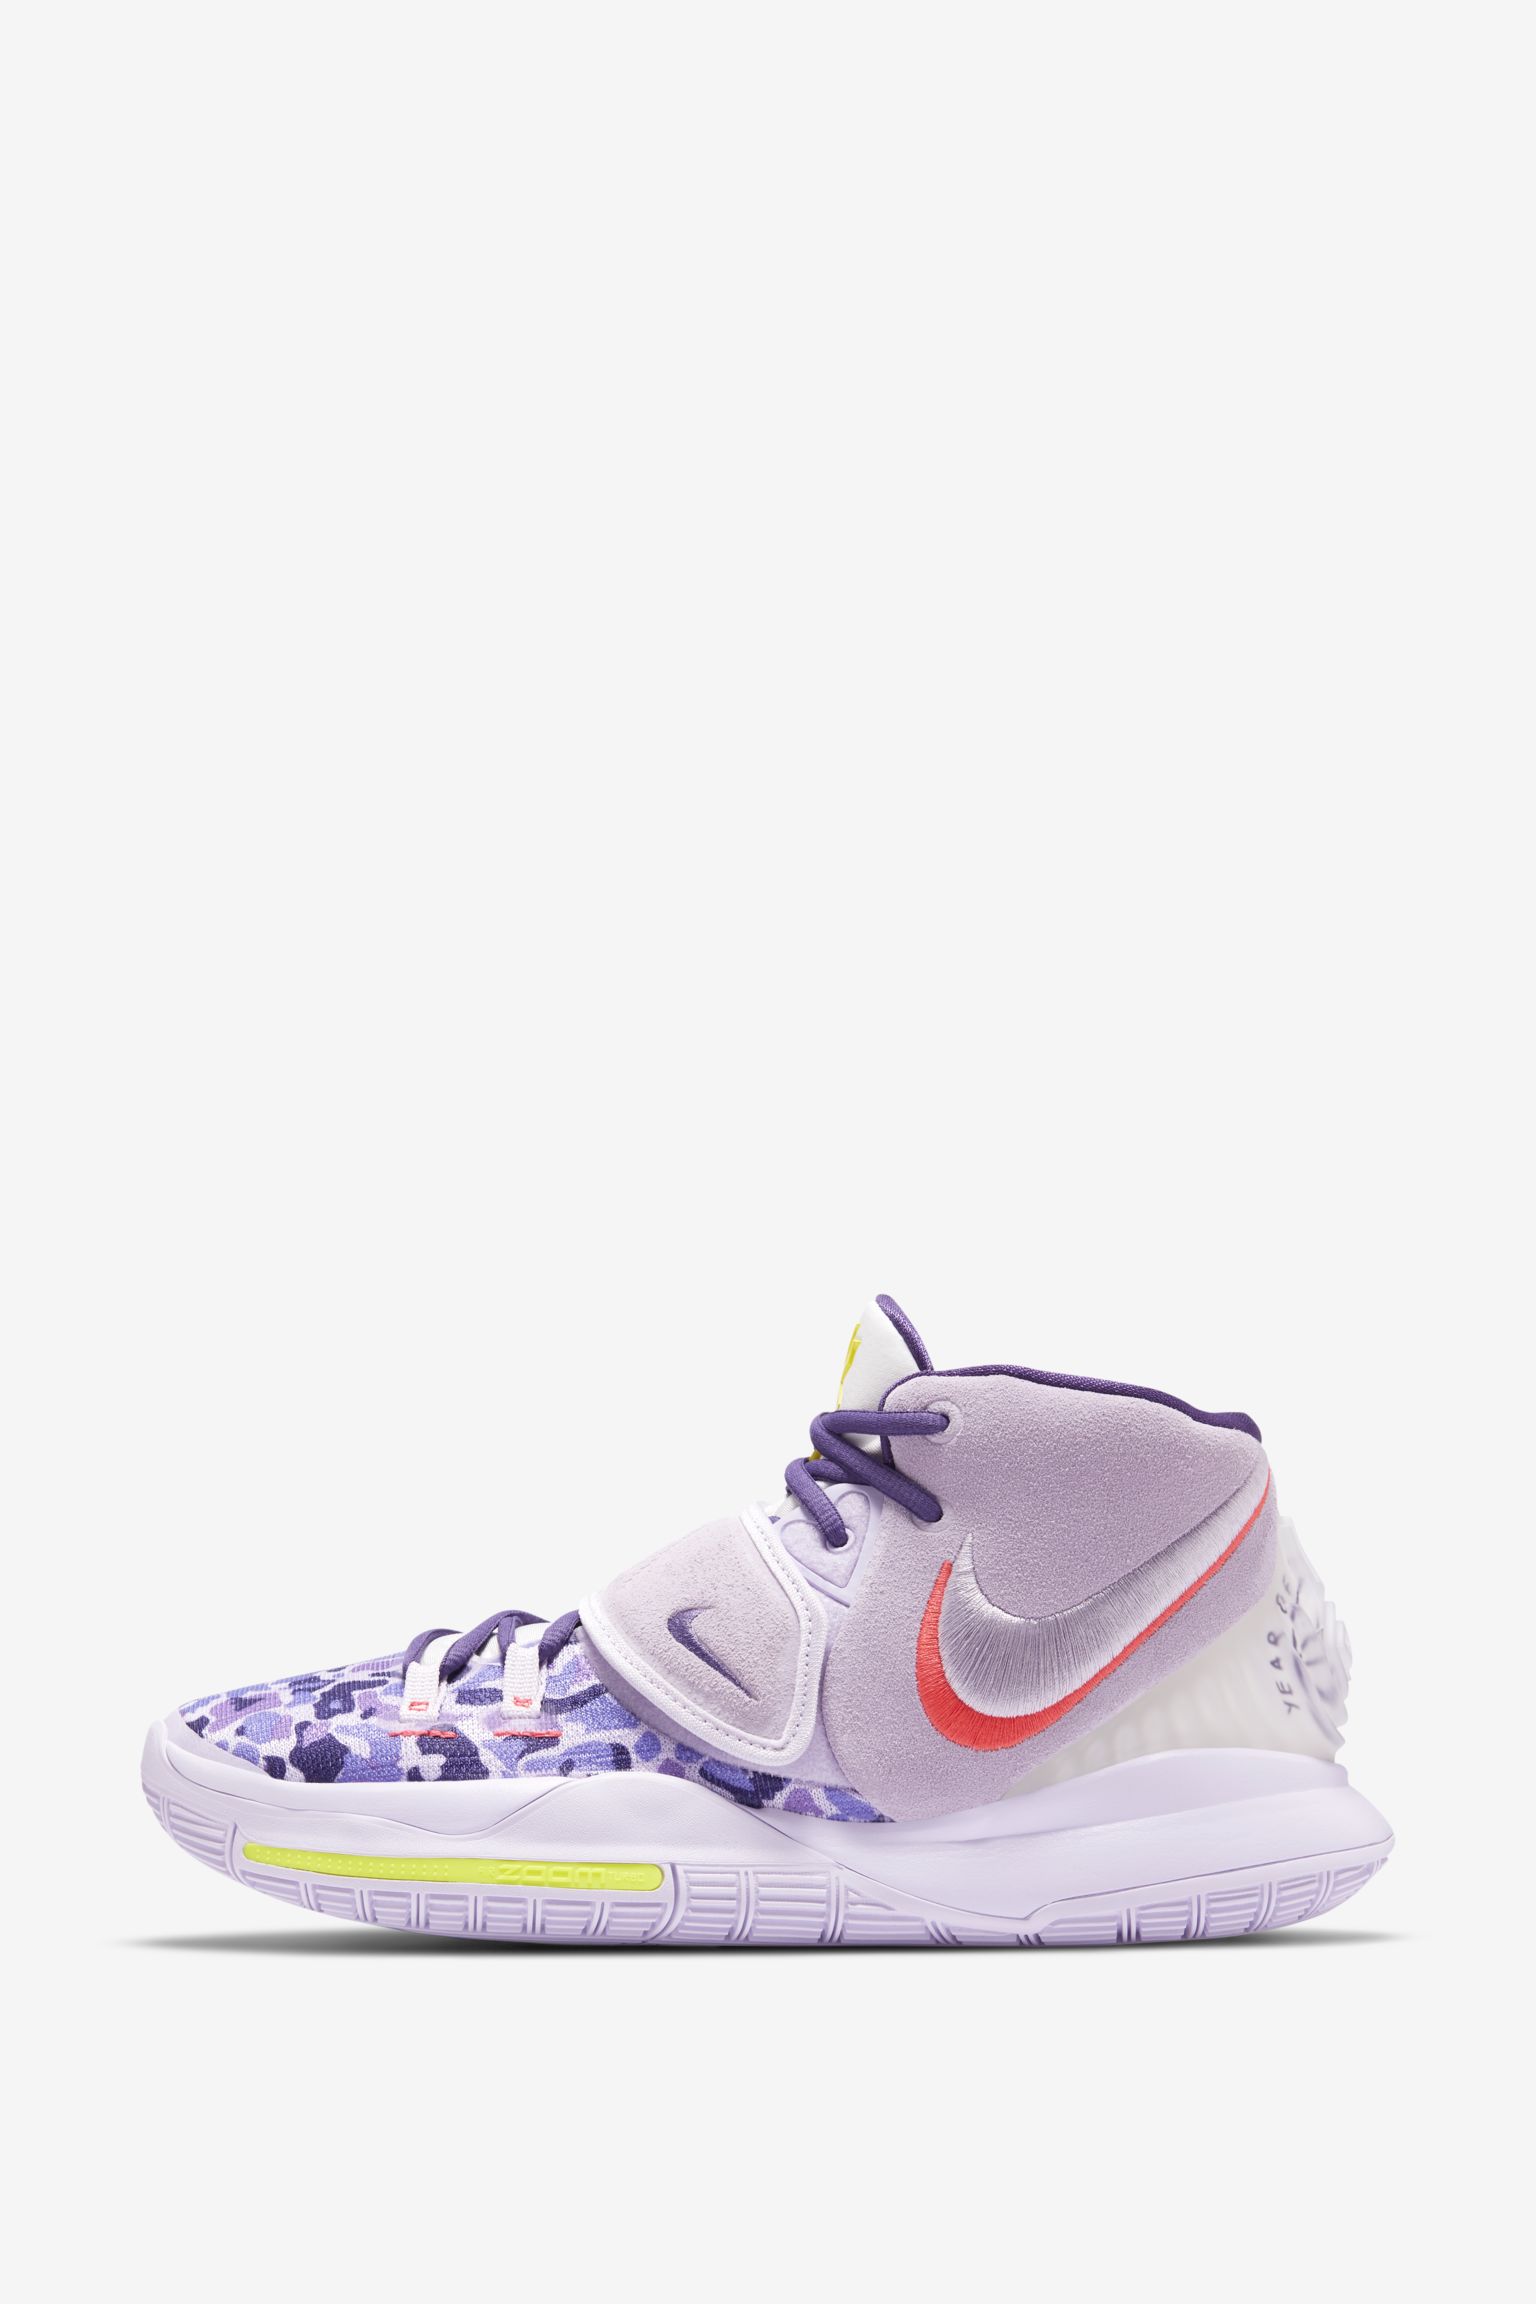 asia irving kyrie 6